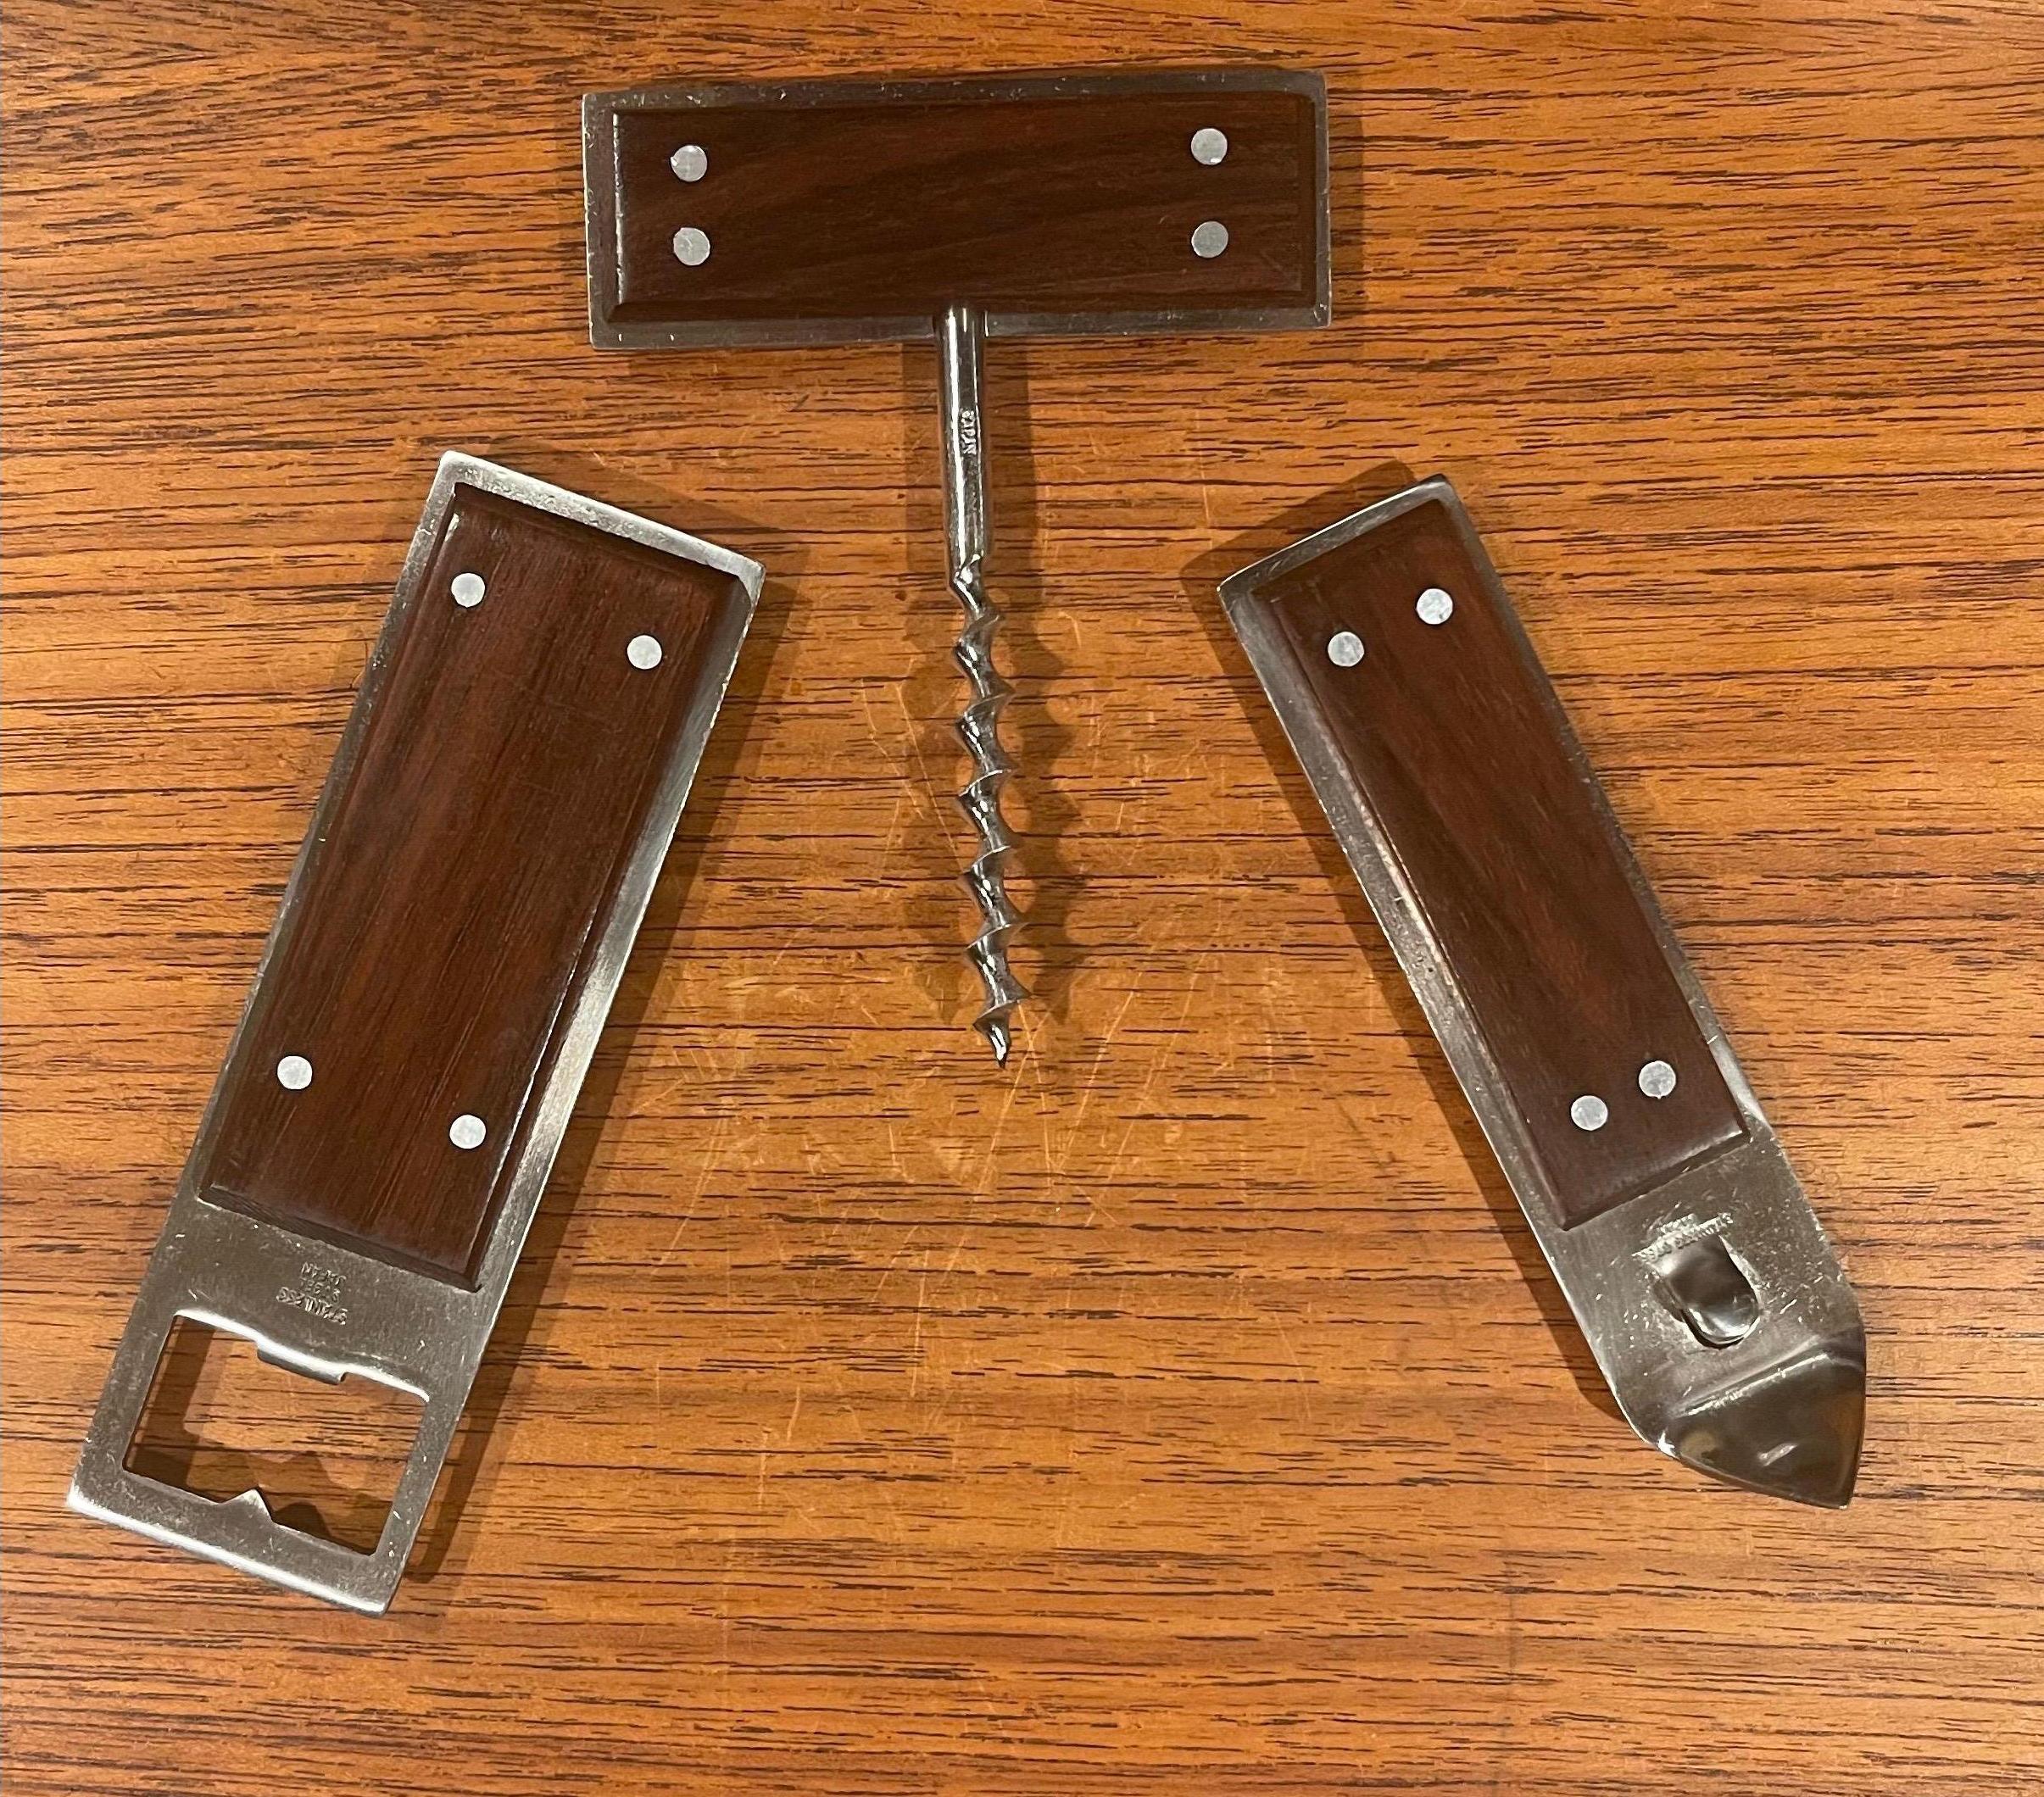 Set of Three Walnut & Stainless Steel Barware Tools from Japan In Good Condition For Sale In San Diego, CA